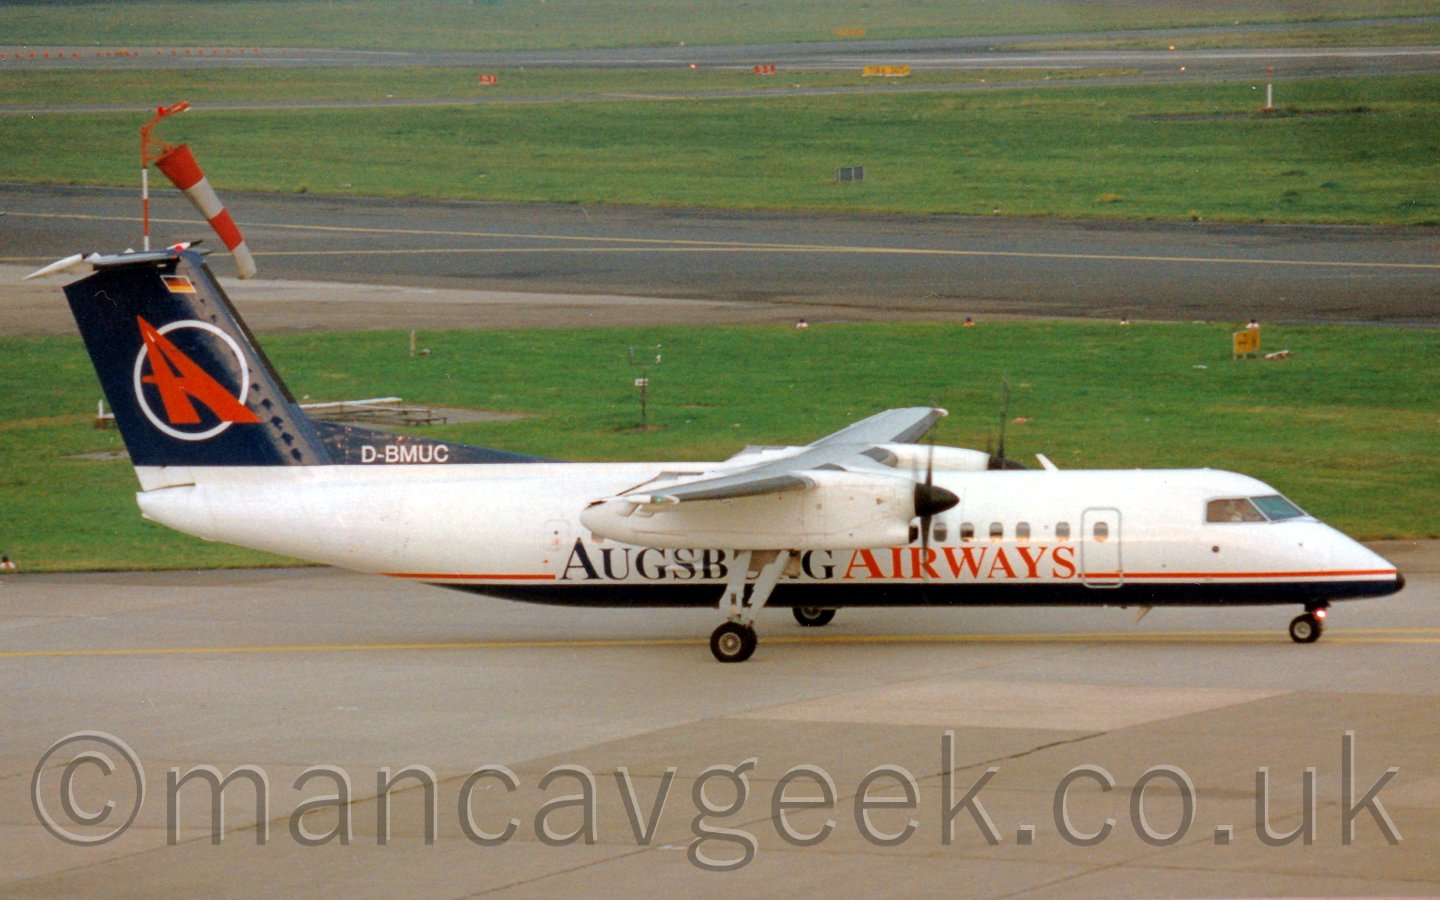 Side view of a high-winged, twin propellor-engined airliner taxiing from left to right. The plane is mostly white, with a dark blue belly, with a thin red stripe runniing along the body seperating the two colours. There are dark blue and red "Augsburg Airways" titles on the lower fuselage. The tail is dark blue, with the white outline of a circle, overlaid with a red capital "A", pointing to the North-West, and vaguely resembling a runway. In the background, grassed areas are seperated by taxiways and a runway.